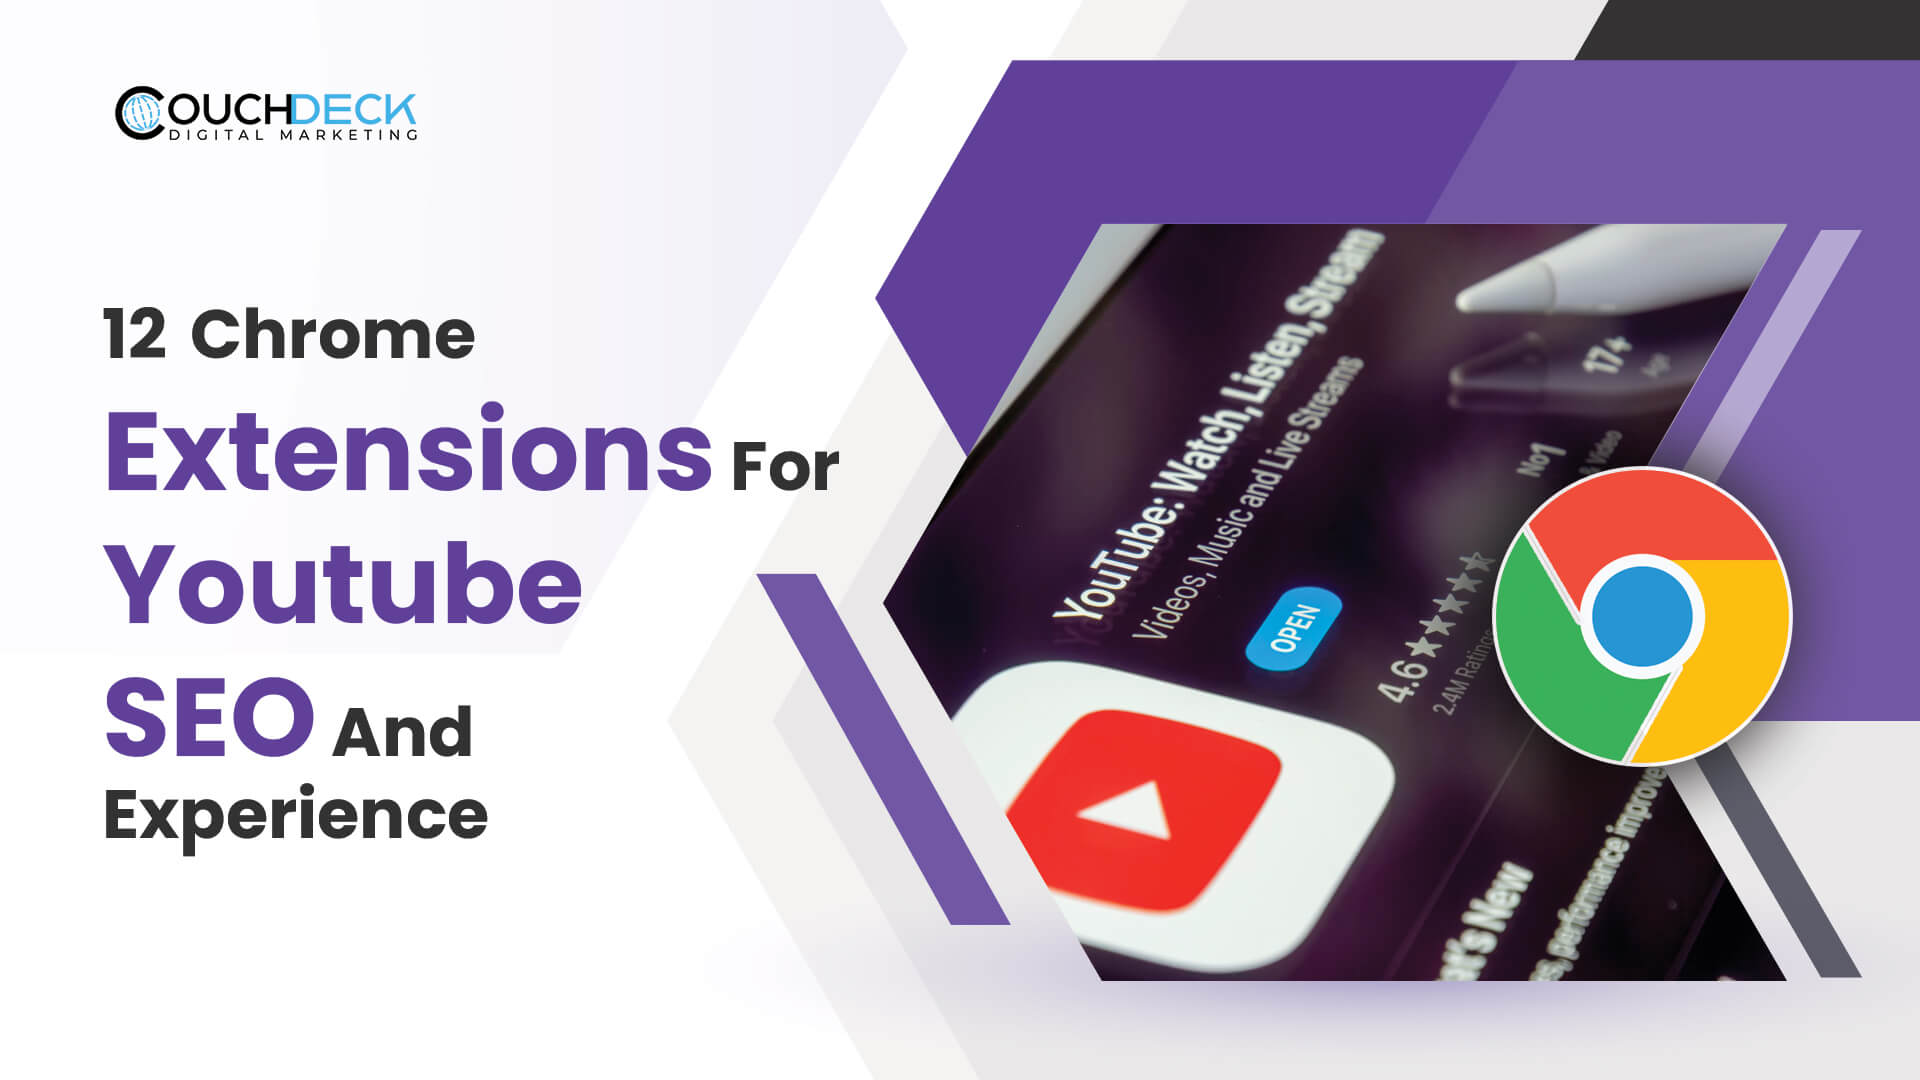 12 Chrome Extensions For Youtube SEO And Experience Guidelines